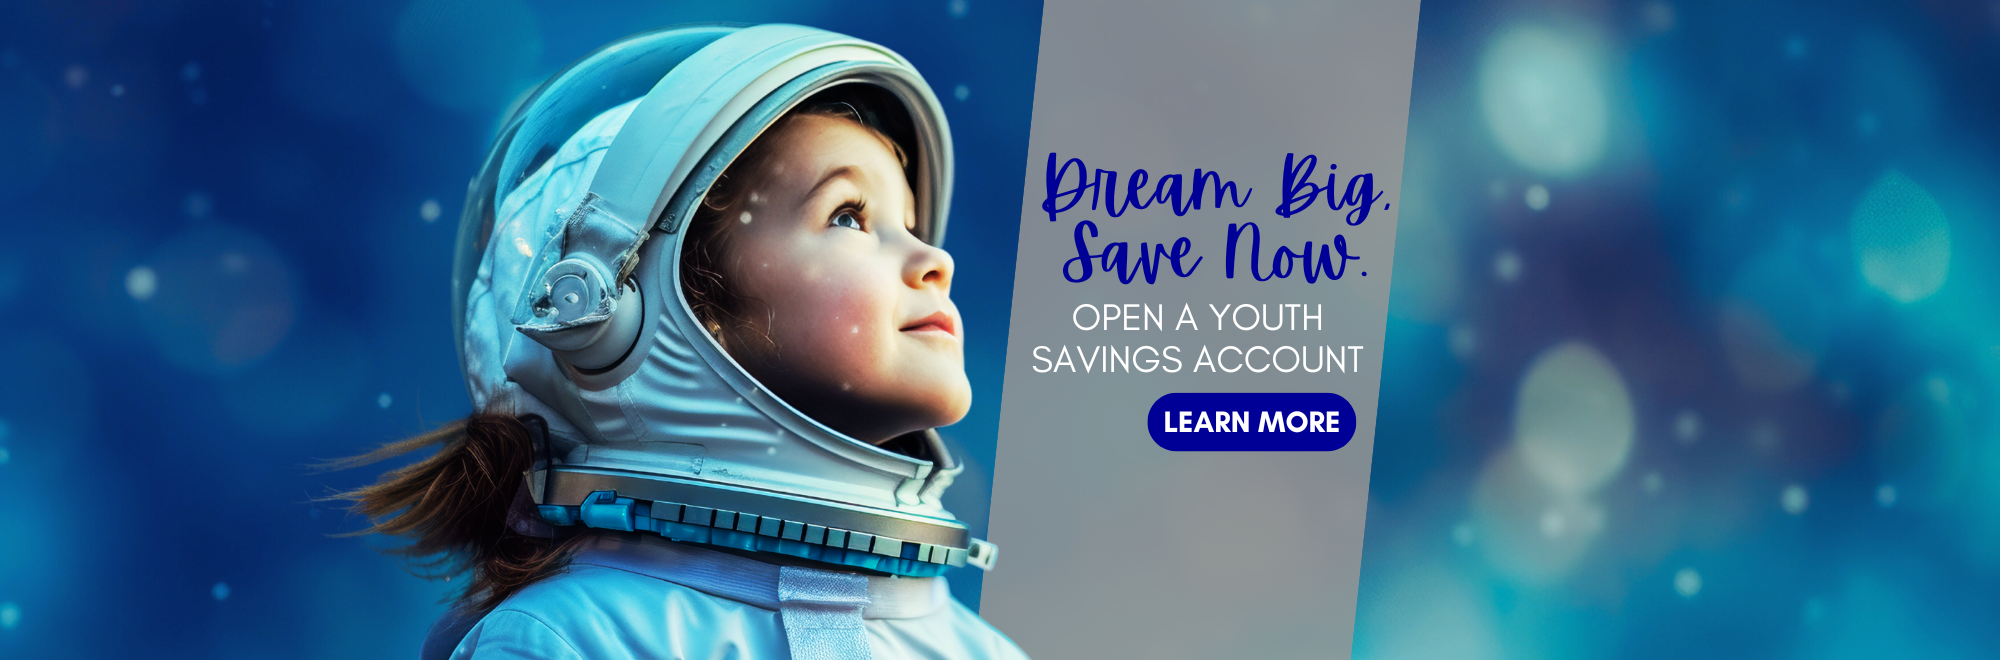 Dream Big. Save Now. Open a youth savings account. Click to learn more.